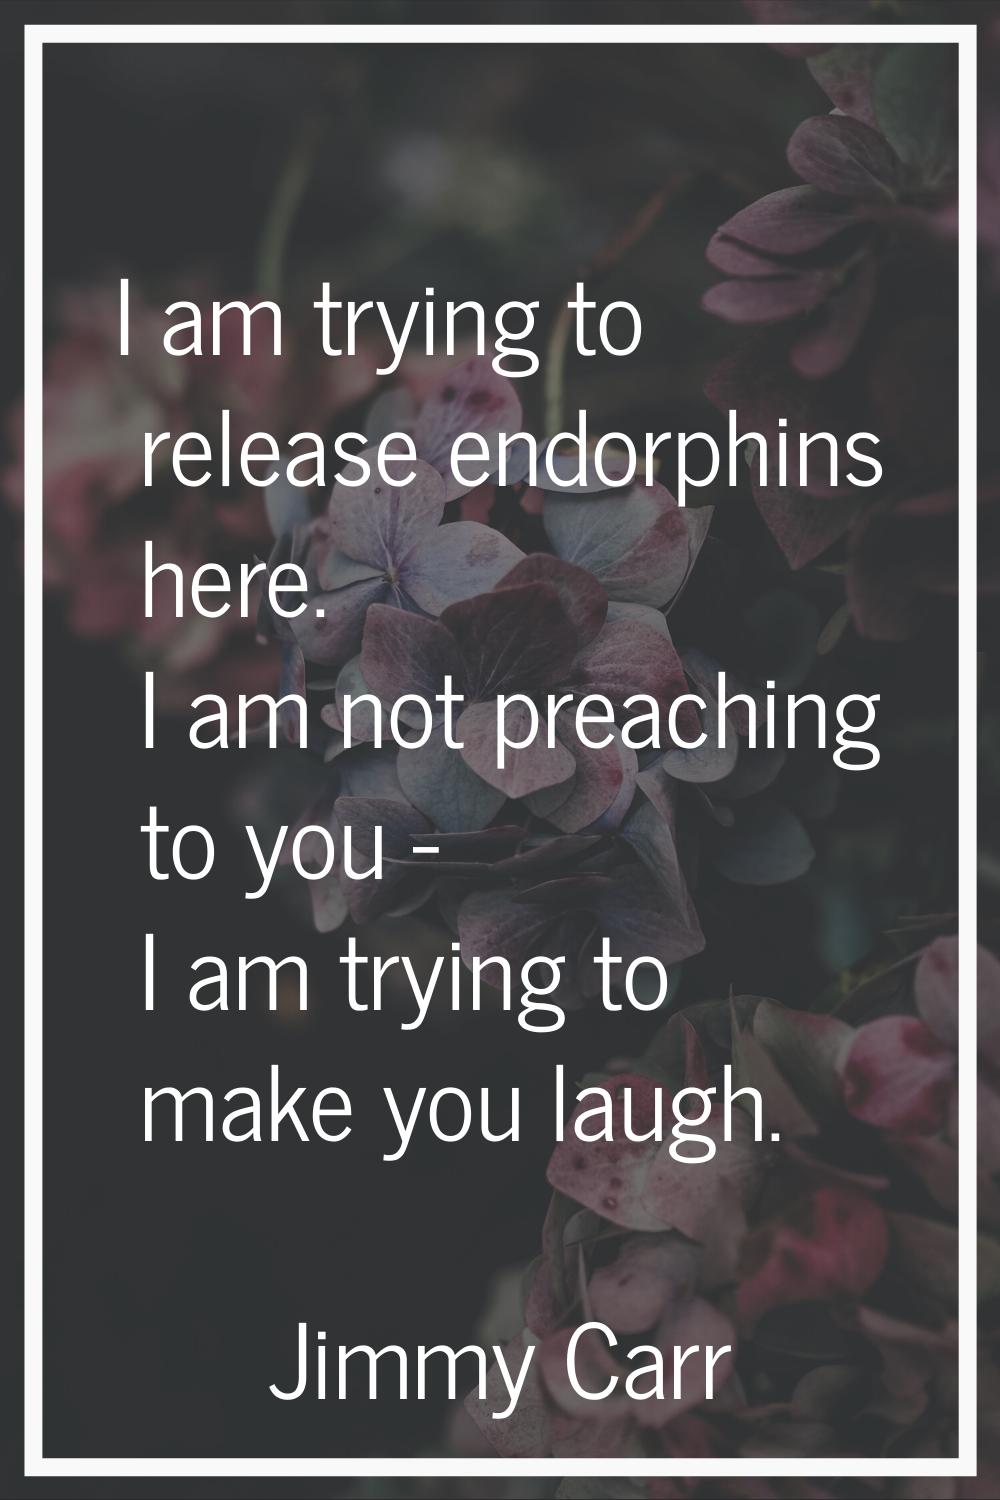 I am trying to release endorphins here. I am not preaching to you - I am trying to make you laugh.